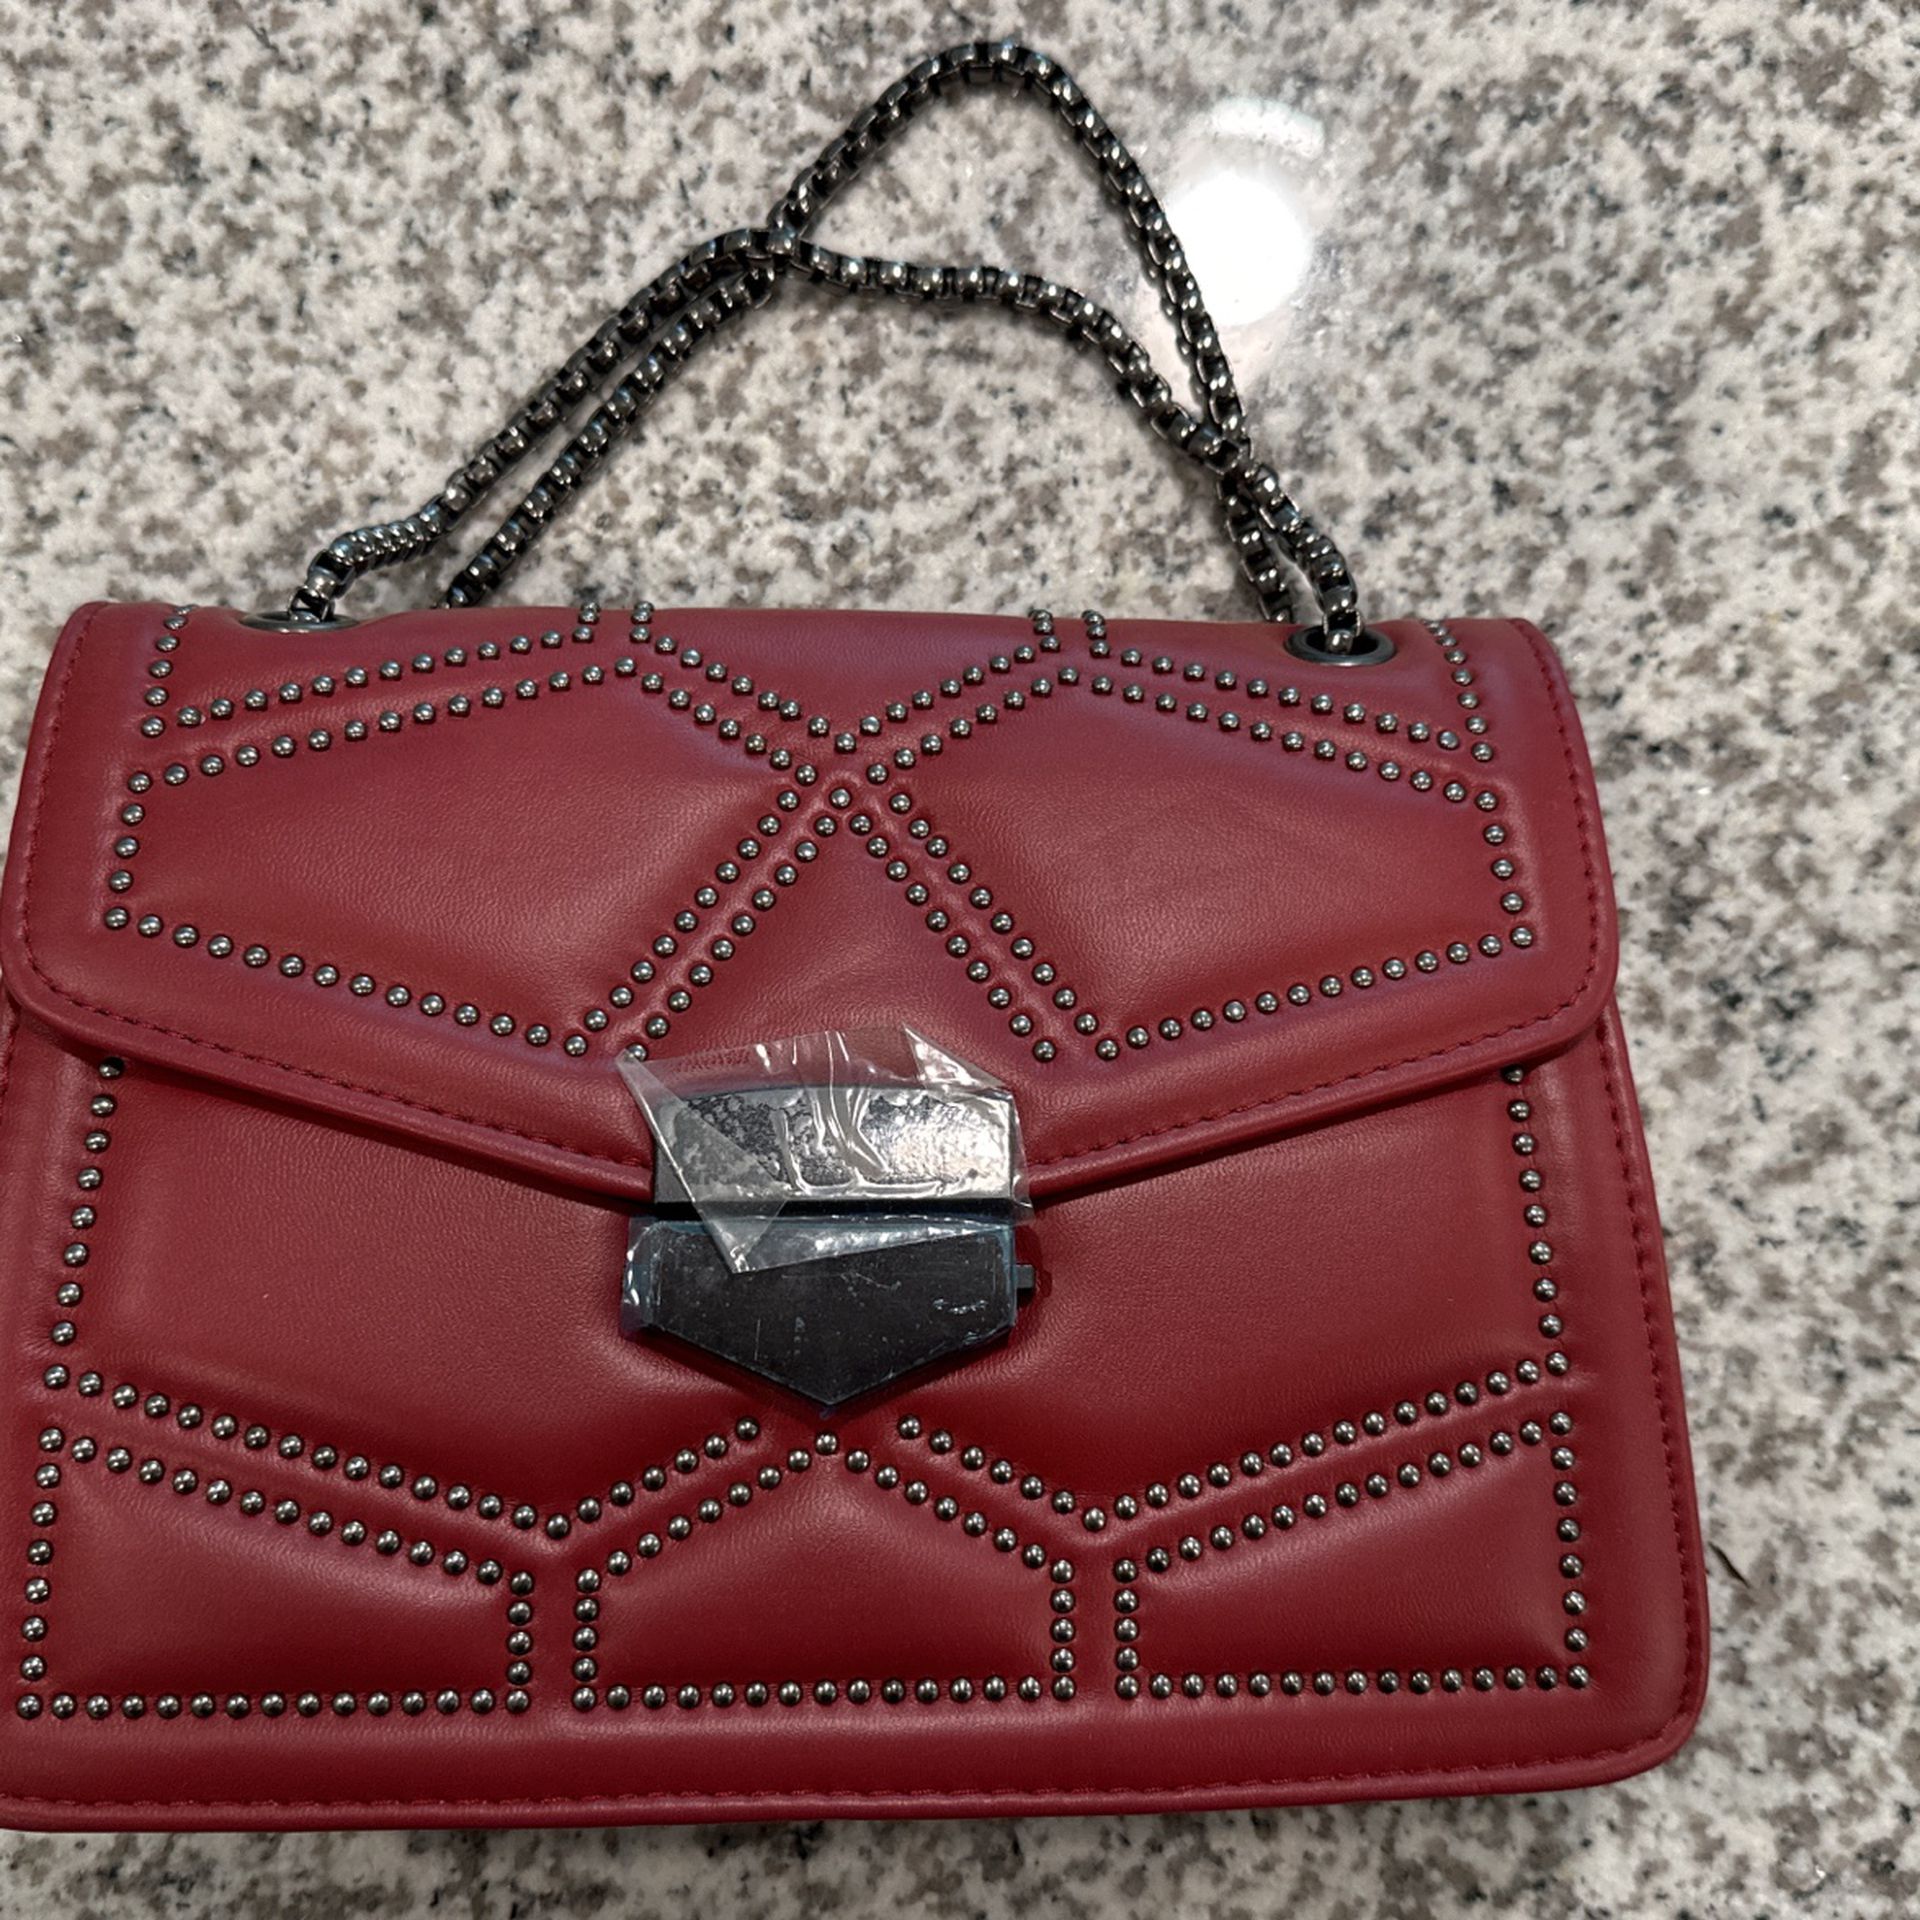 Burgundy Purse With Black Chain Link Straps 